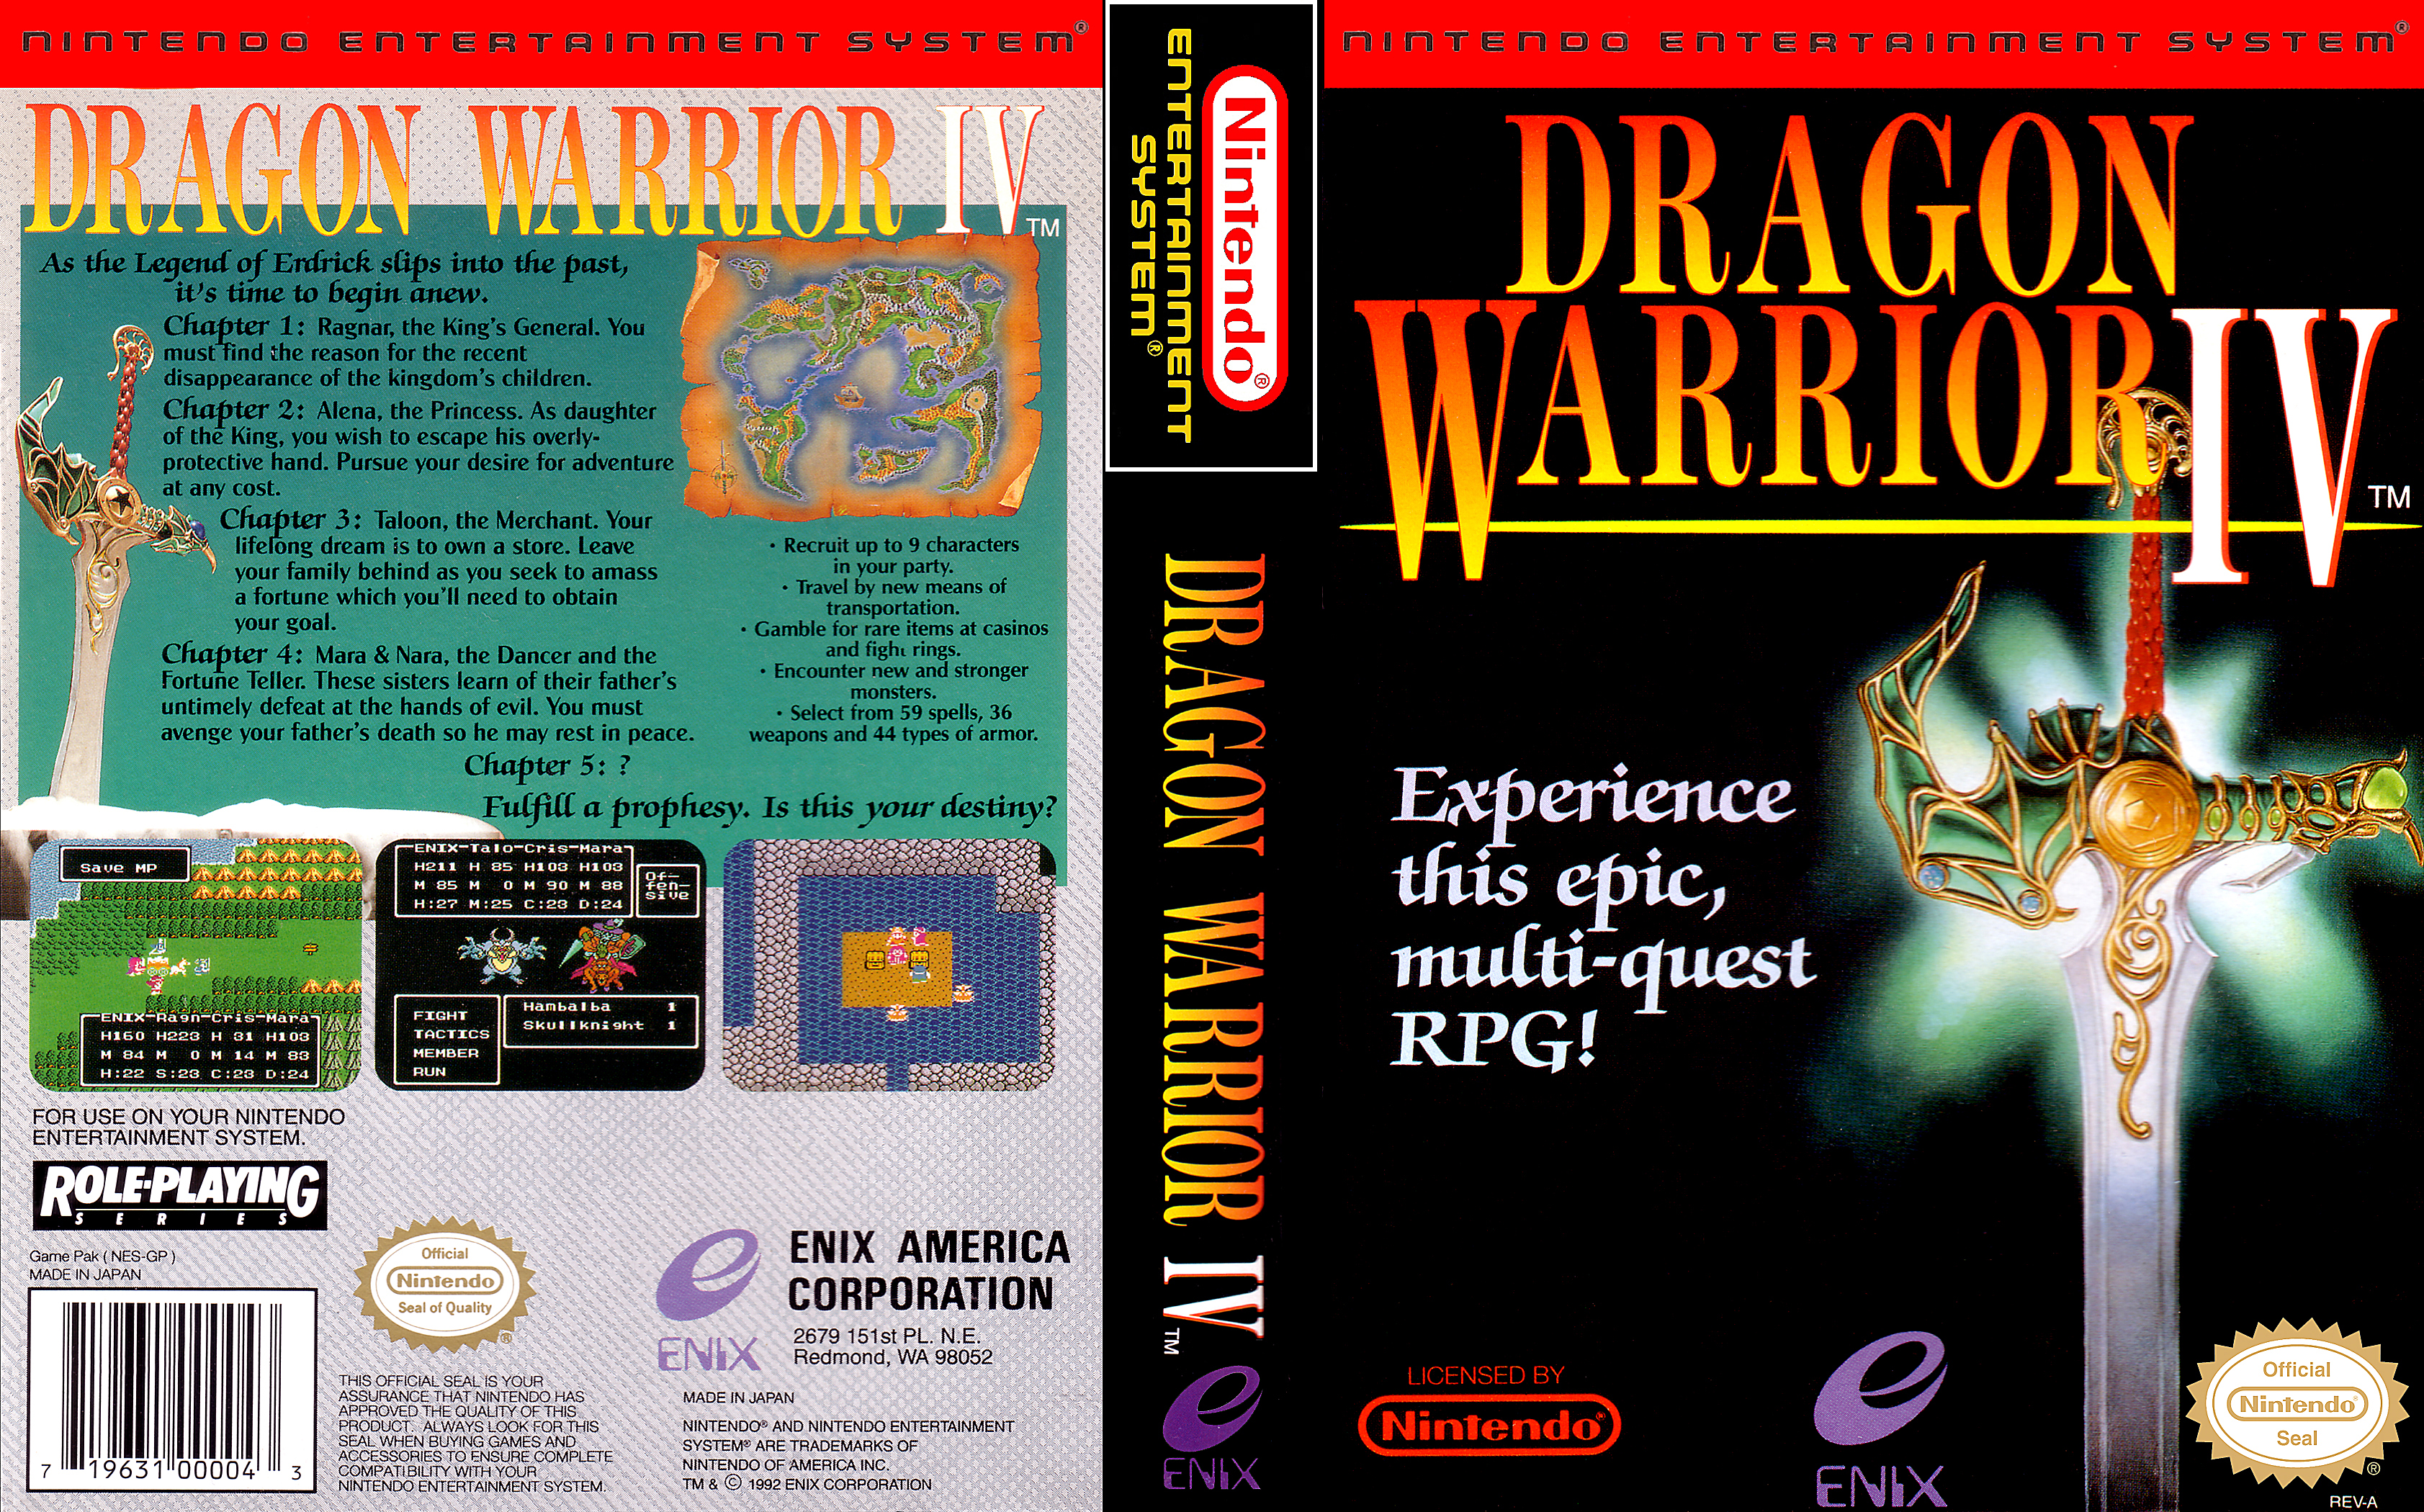 Dragon Warrior 4 Nes Covers Cover Century Over 500 000 Album Art Covers For Free